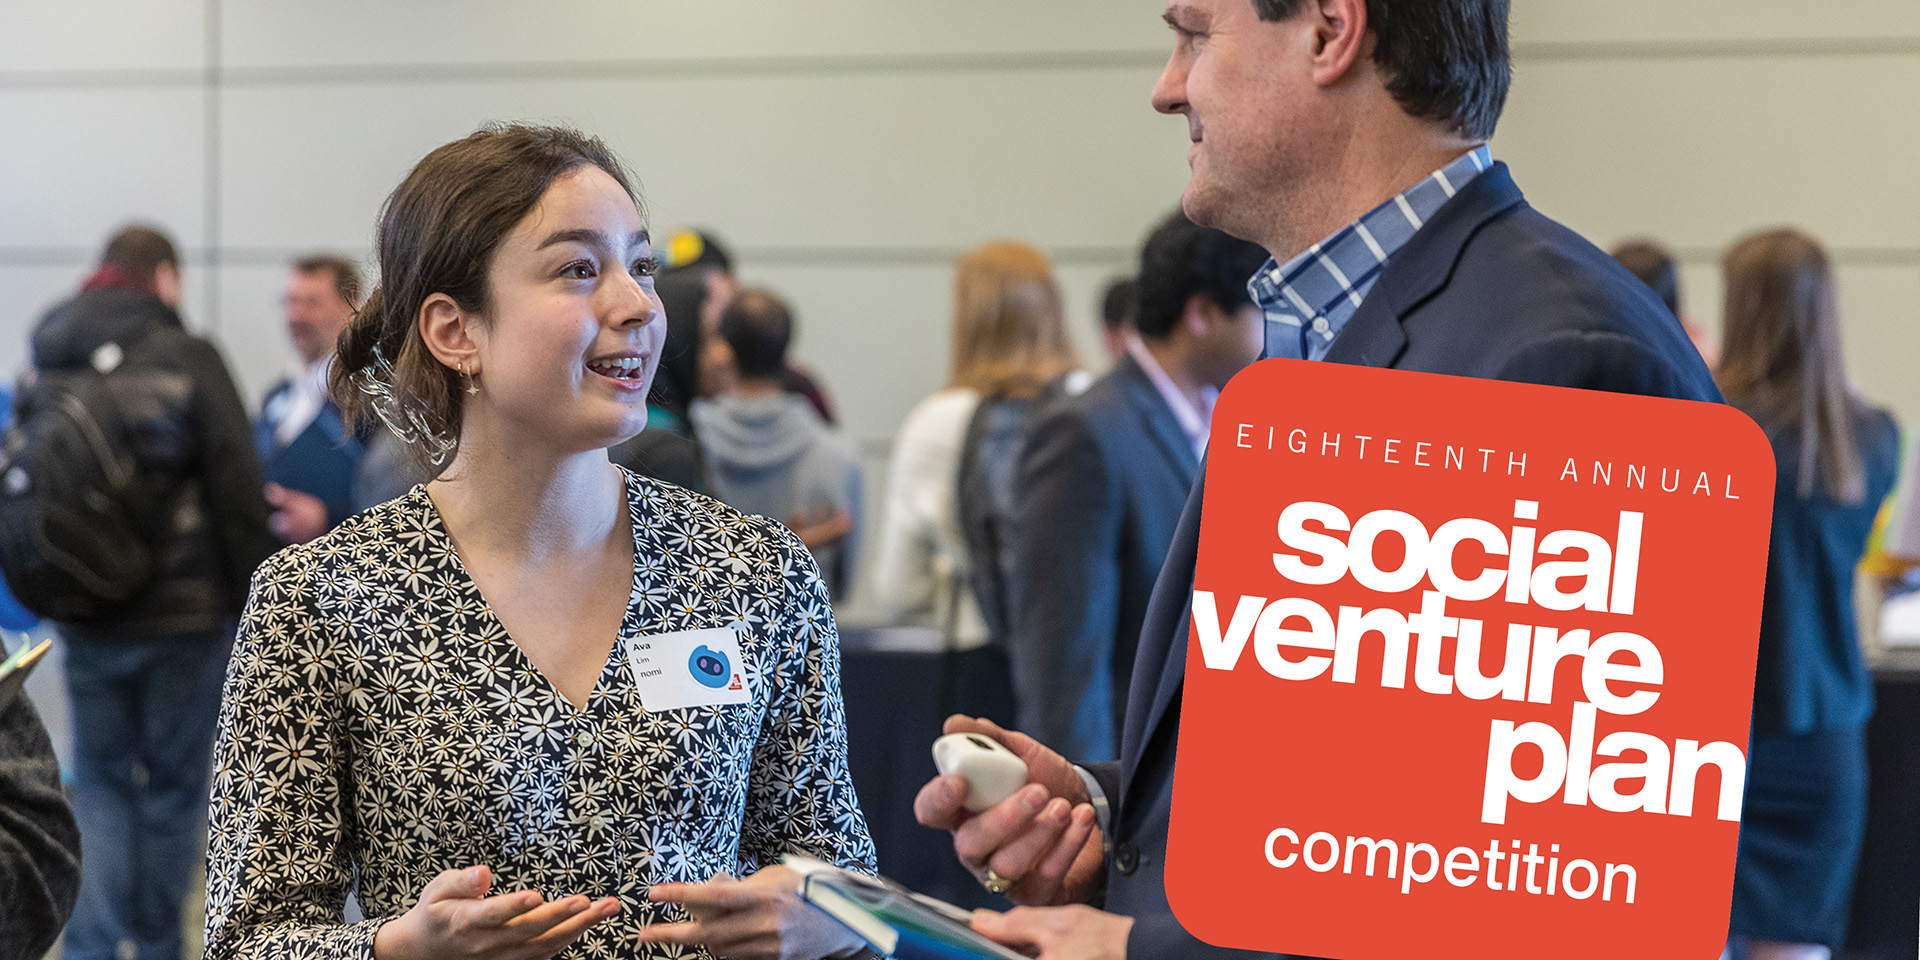 Eighteenth Annual Social Venture Plan competition